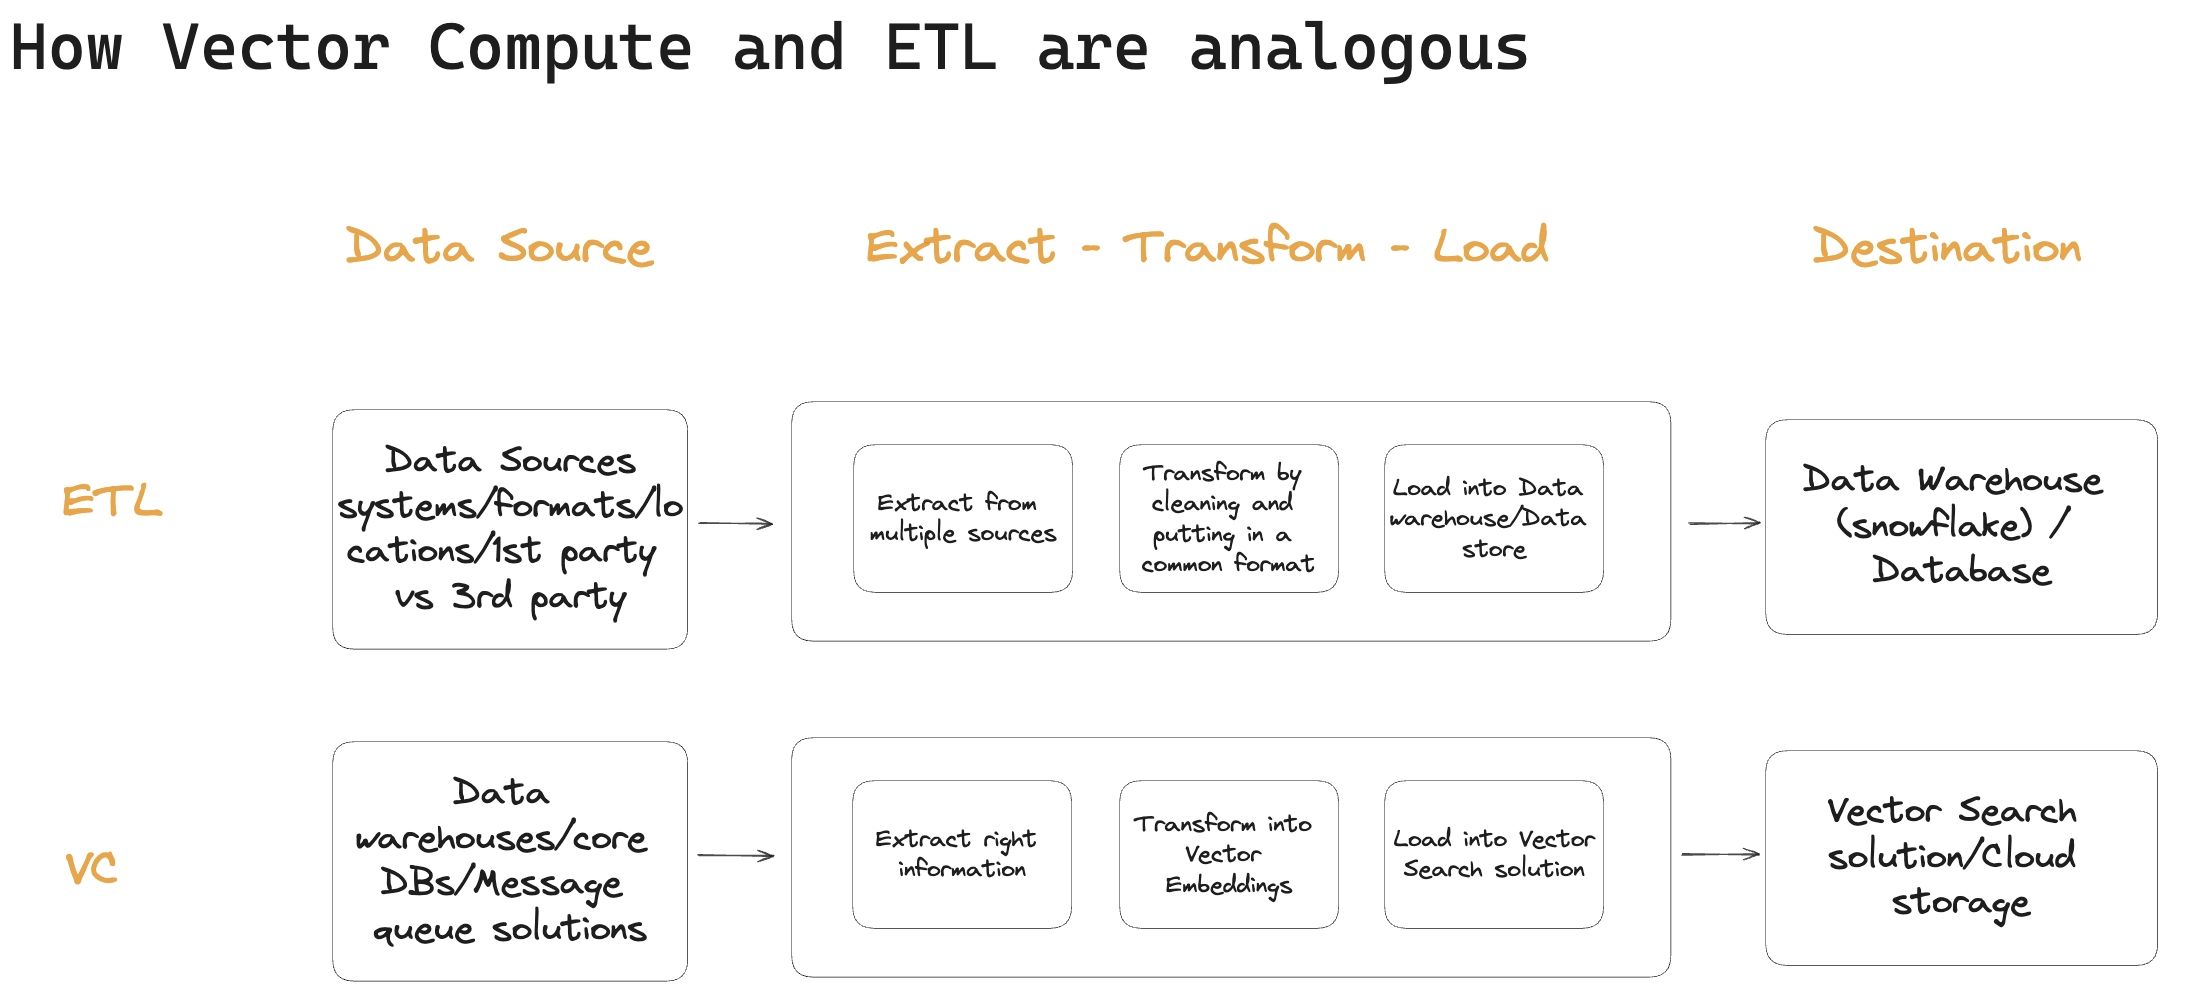 How Vector Compute and ETL are analogous